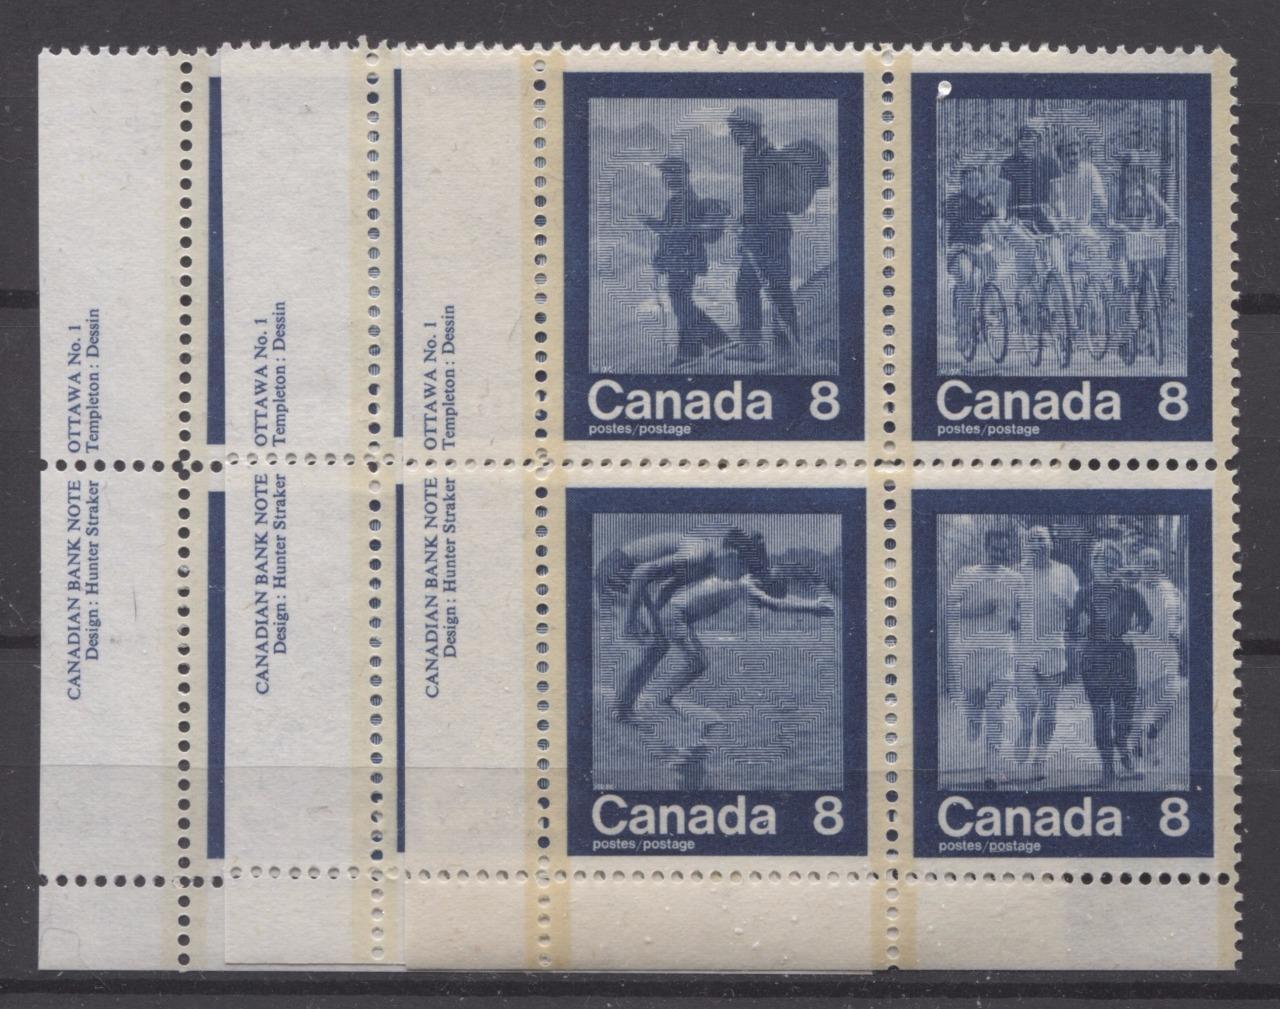 Canada #632a (SG#768a) 1974 Summer Sports Issue Block of 4 Paper/Tag Type 2 Plate 1 LL VF-75 NH Brixton Chrome 